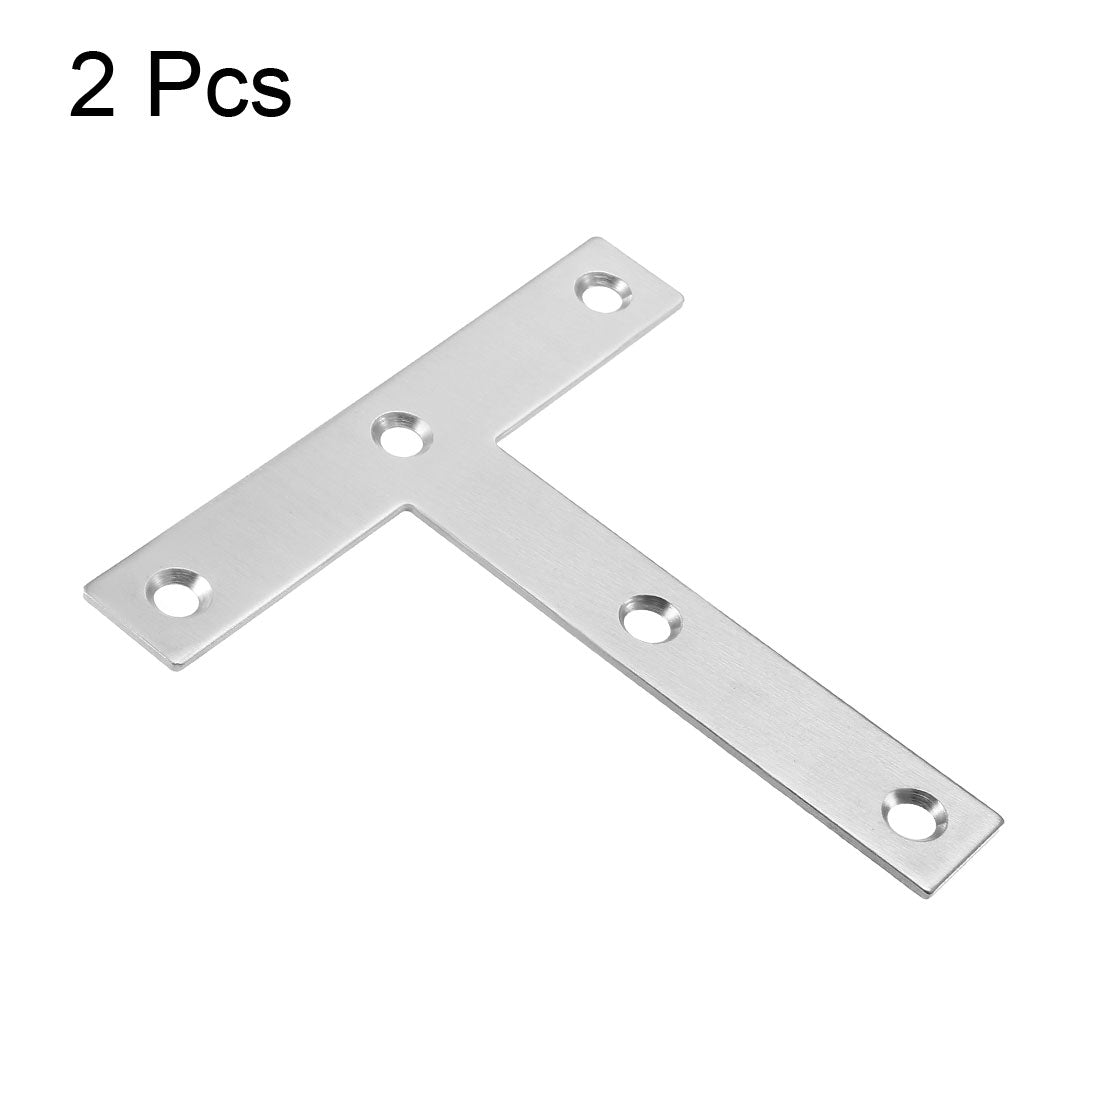 uxcell Uxcell Flat T Shape Repair Mending Plate, 120mmx120mm, Stainless steel Joining Bracket Support Brace, 2 Pcs